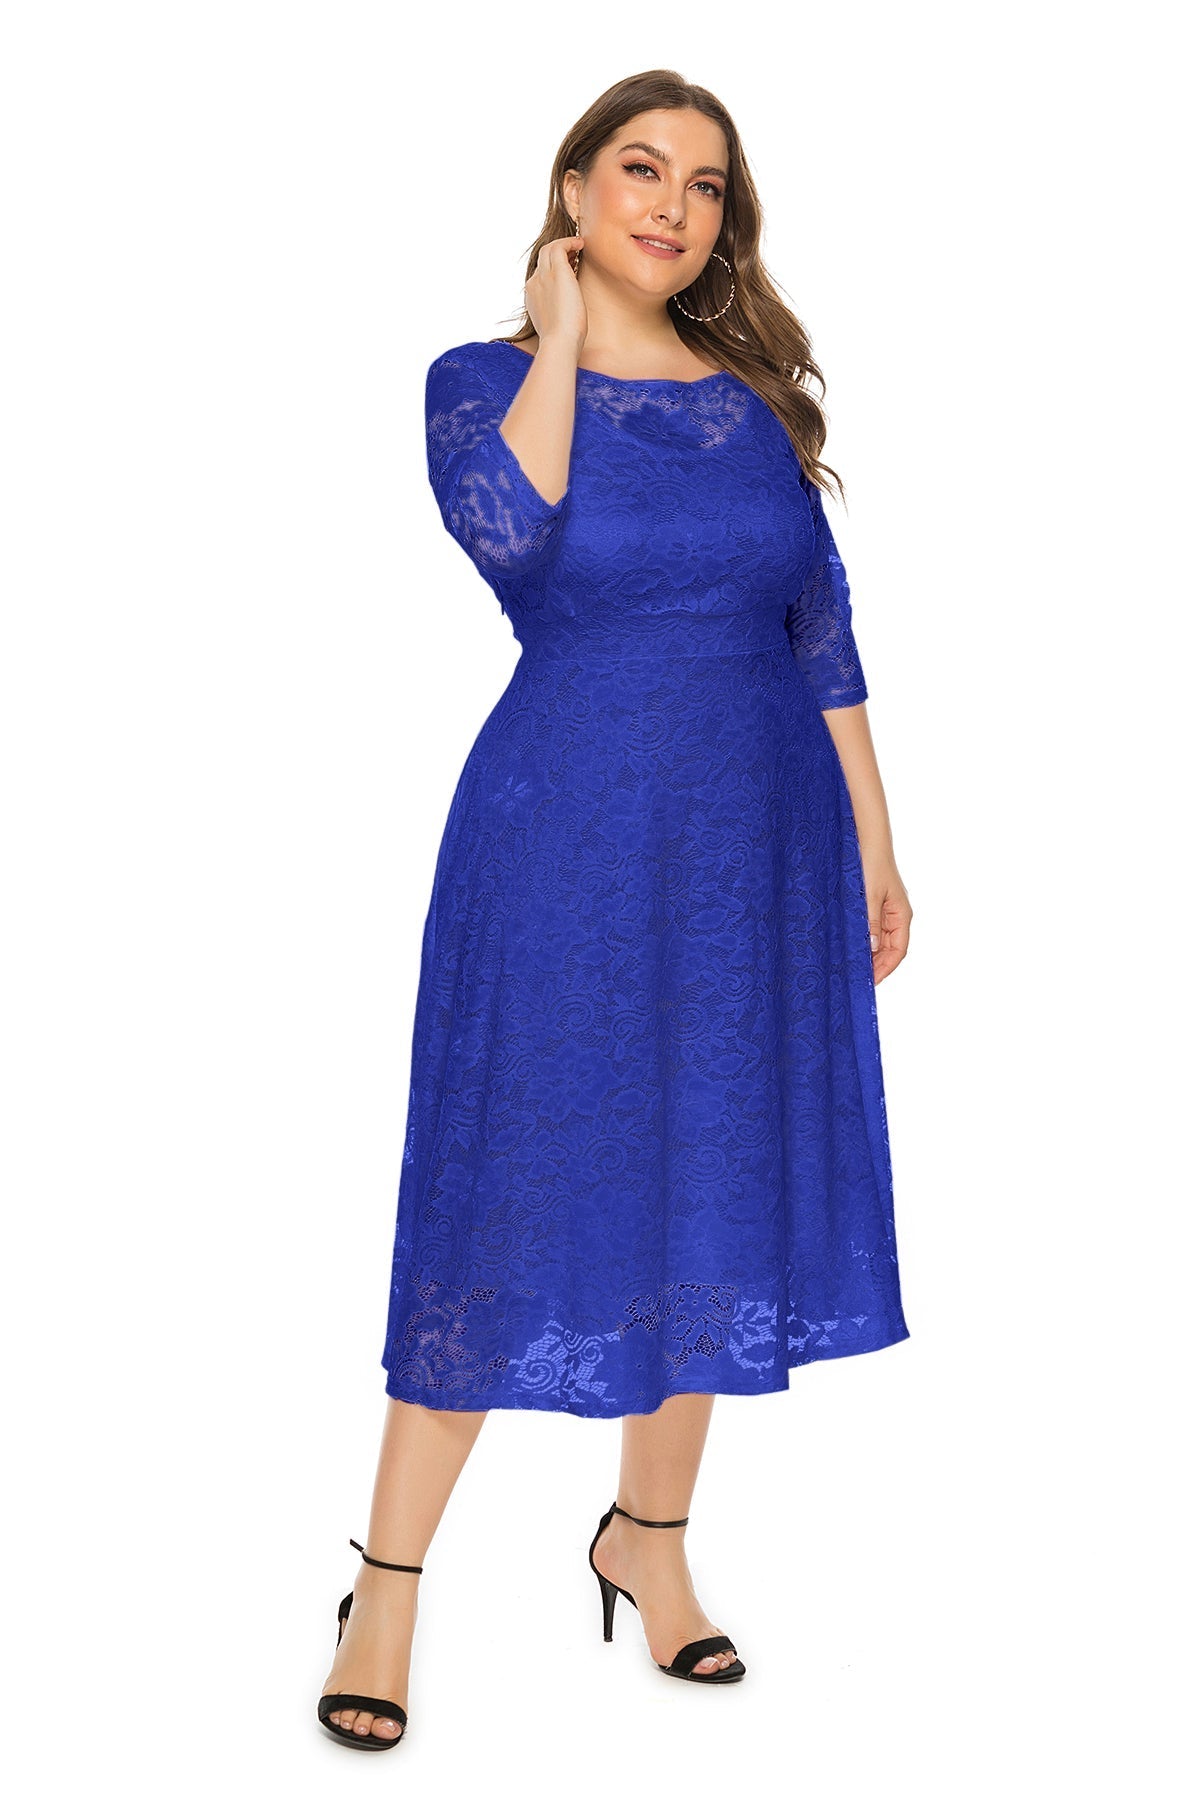 Plus Lace Overlay Party Dress Sai Feel